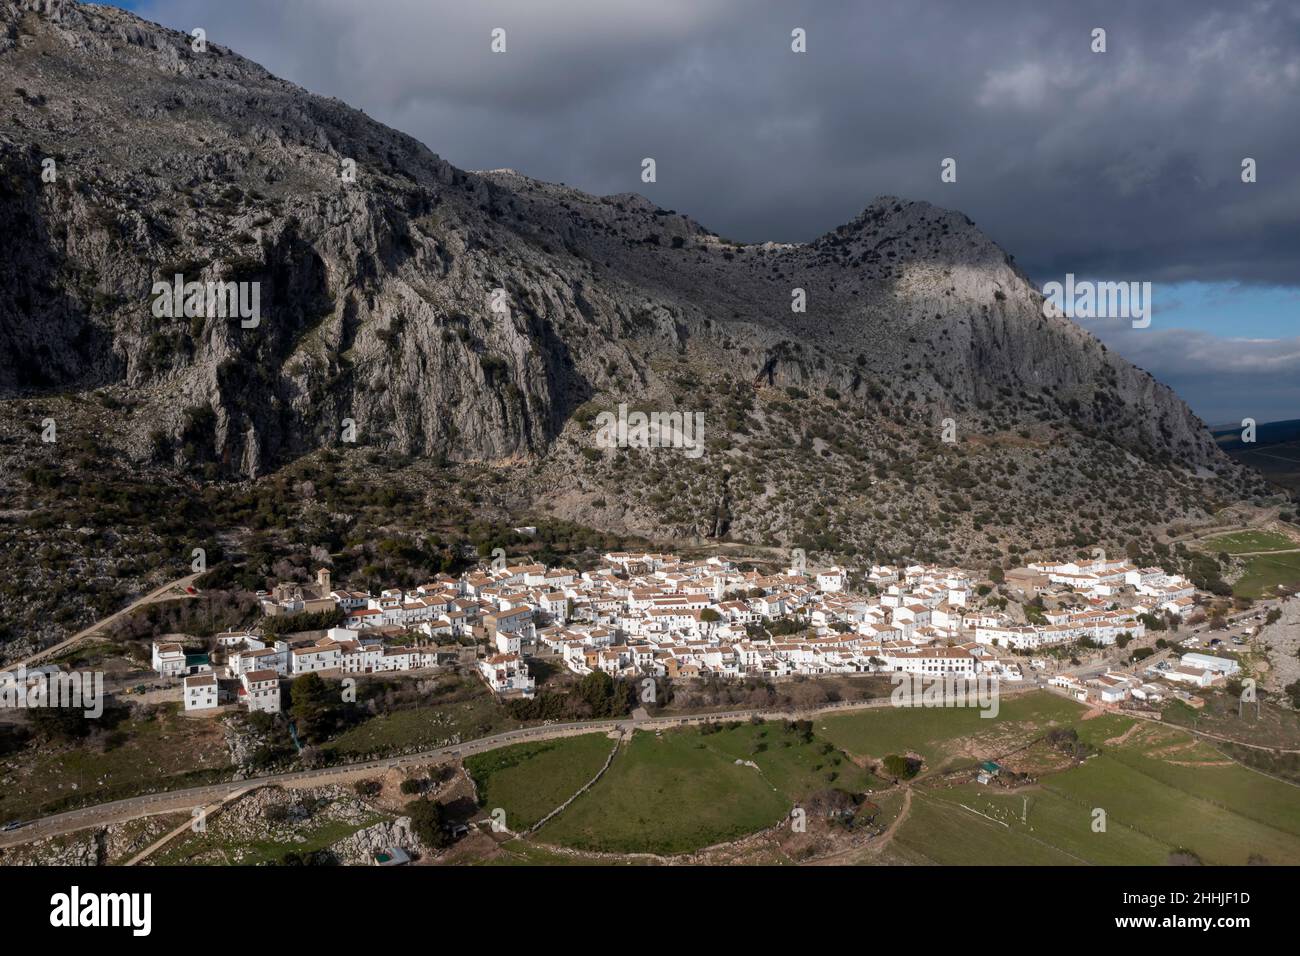 municipality of Villaluenga del Rosario in the comarca of the white villages in the province of Cadiz, Spain Stock Photo